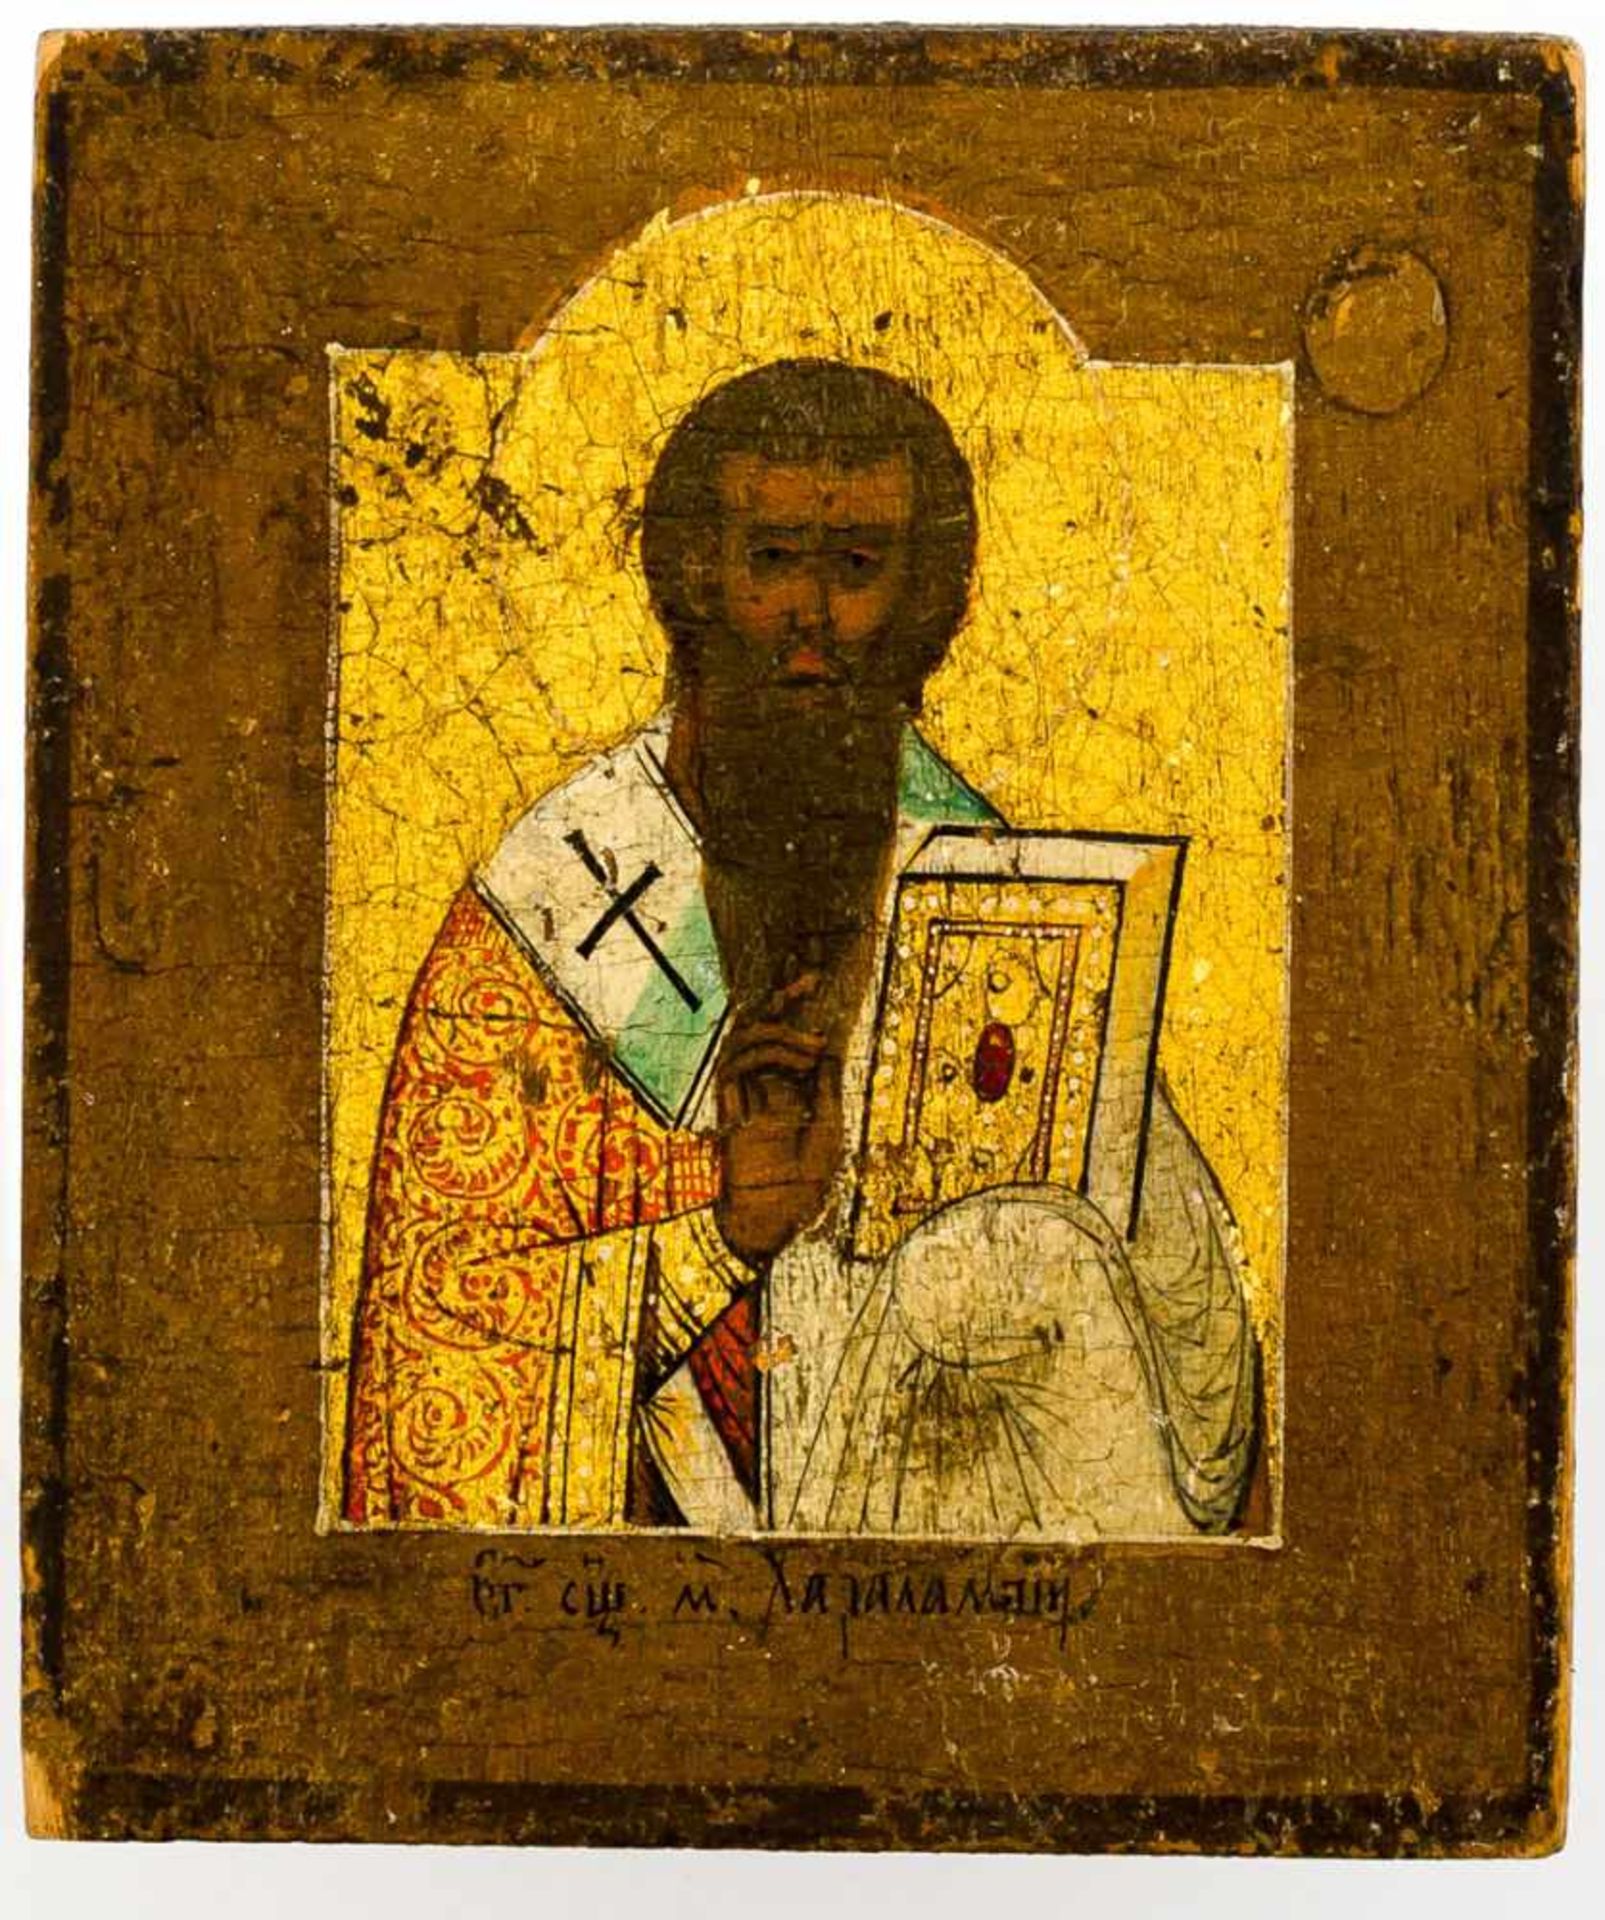 Hl. Charalampios Russische Ikone, 19. Jh. 10,2 x 8,7 cm St. Charalampy, Russian icon, 19th c., 10,